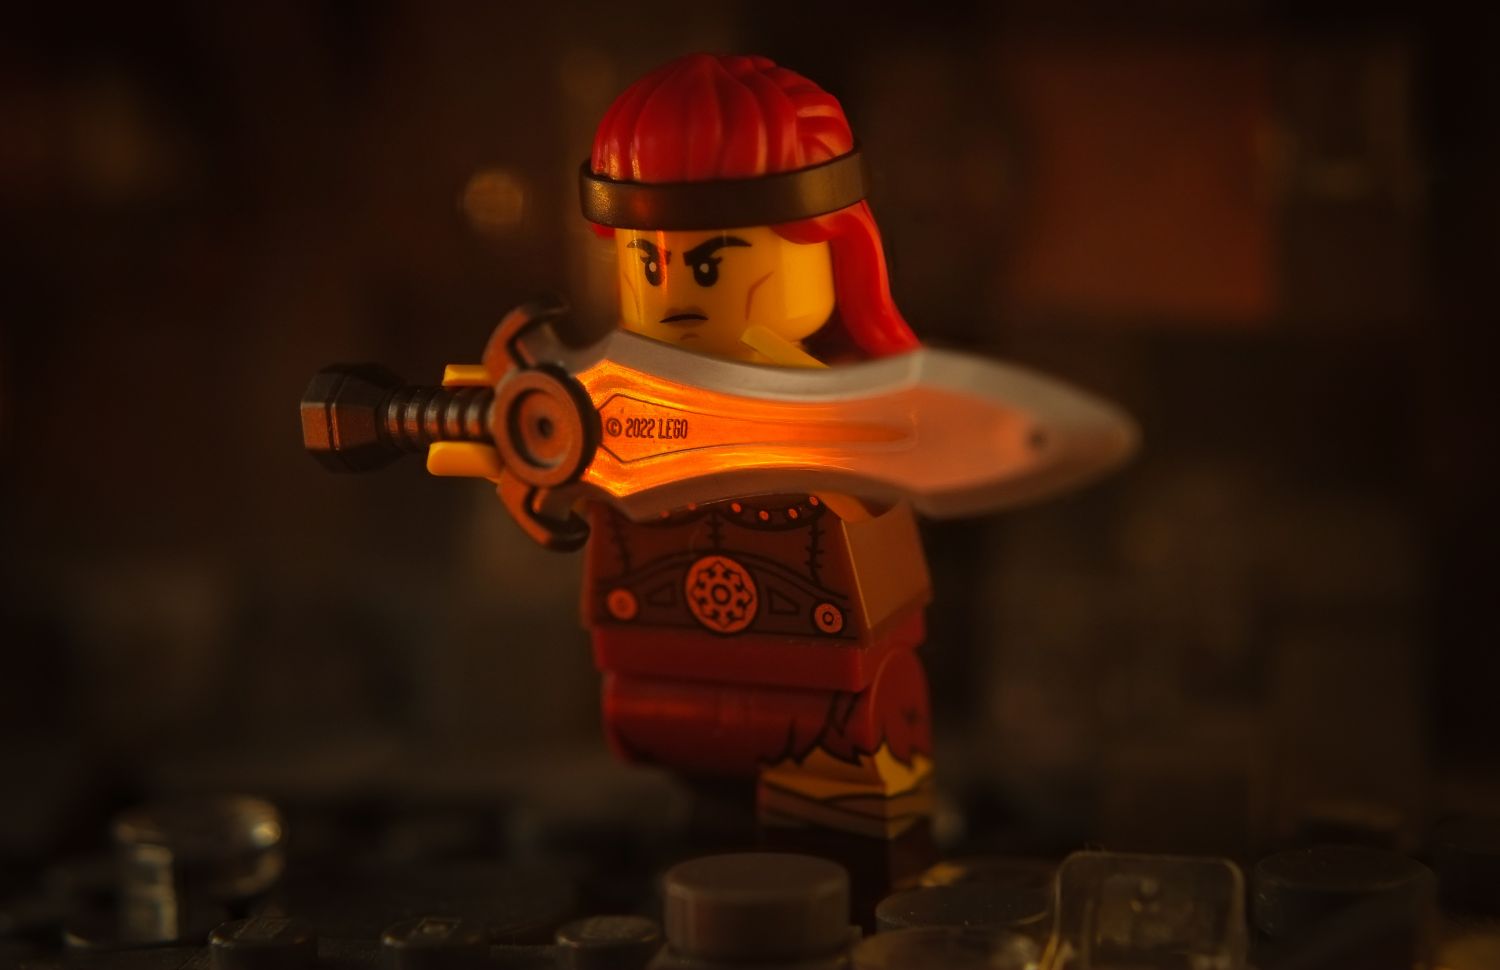 A LEGO barbarian minifigure holding a sword in front of her.